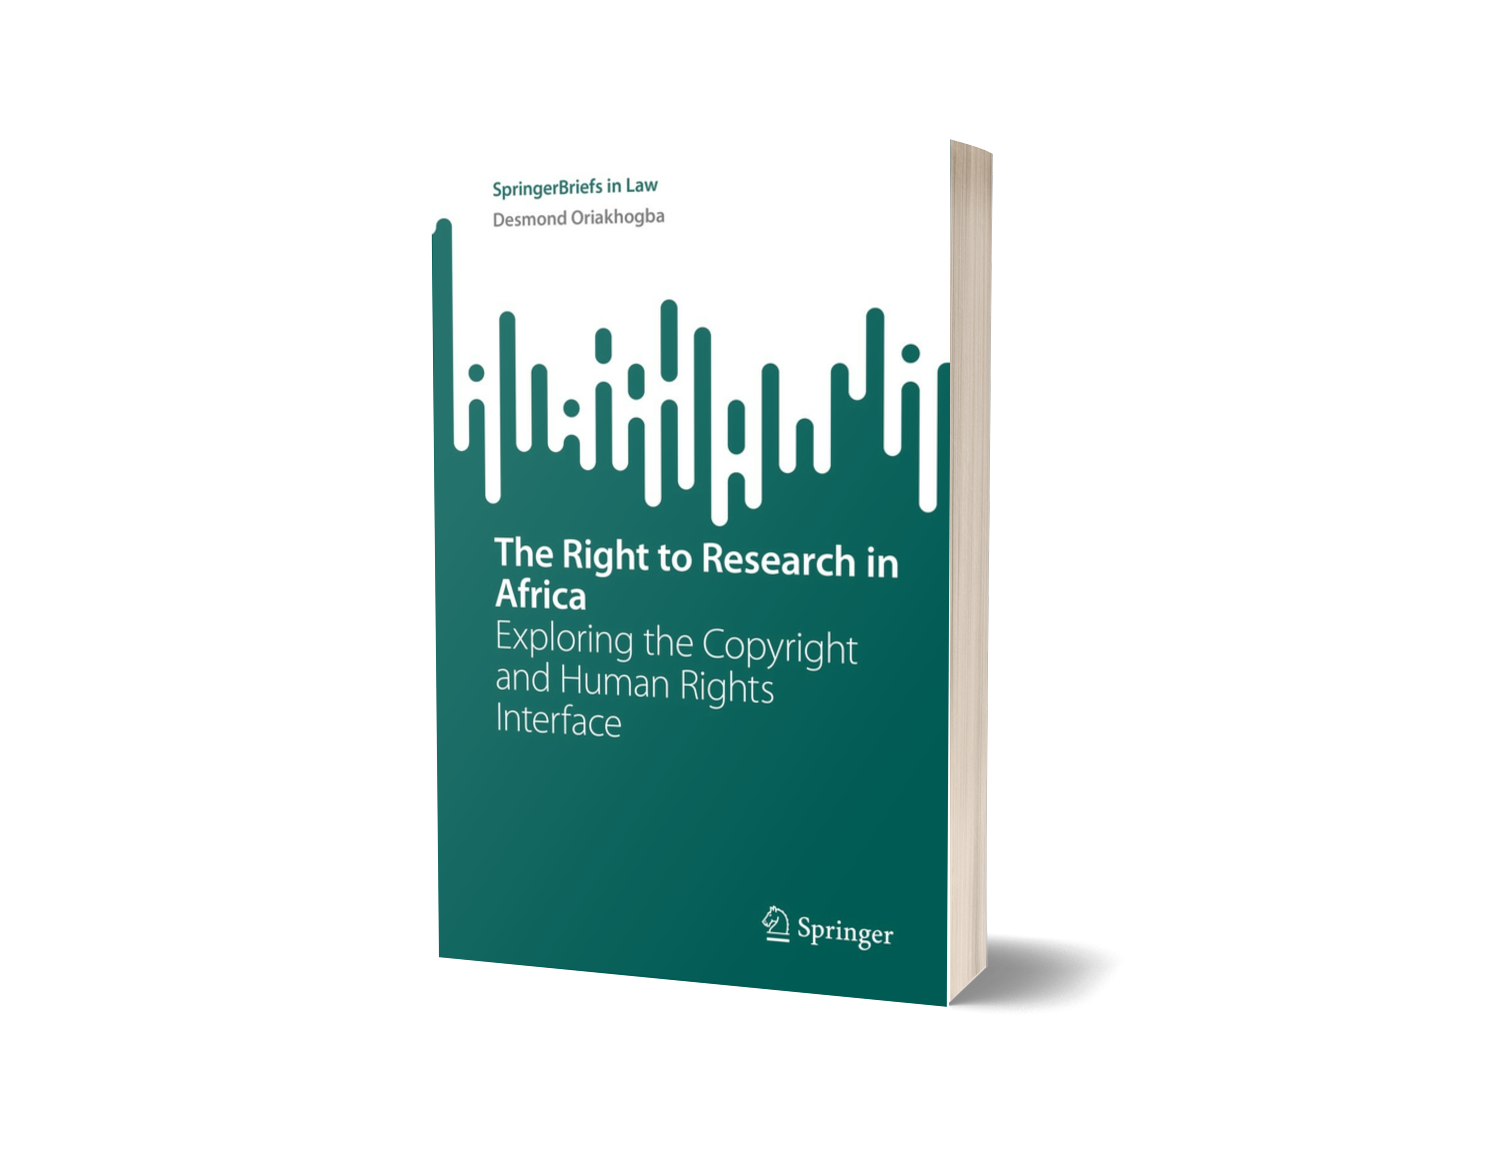 Oriakhogba, Desmond The Right to Research in Africa: Exploring the Copyright and Humans Rights Interface (Springer, 2023)